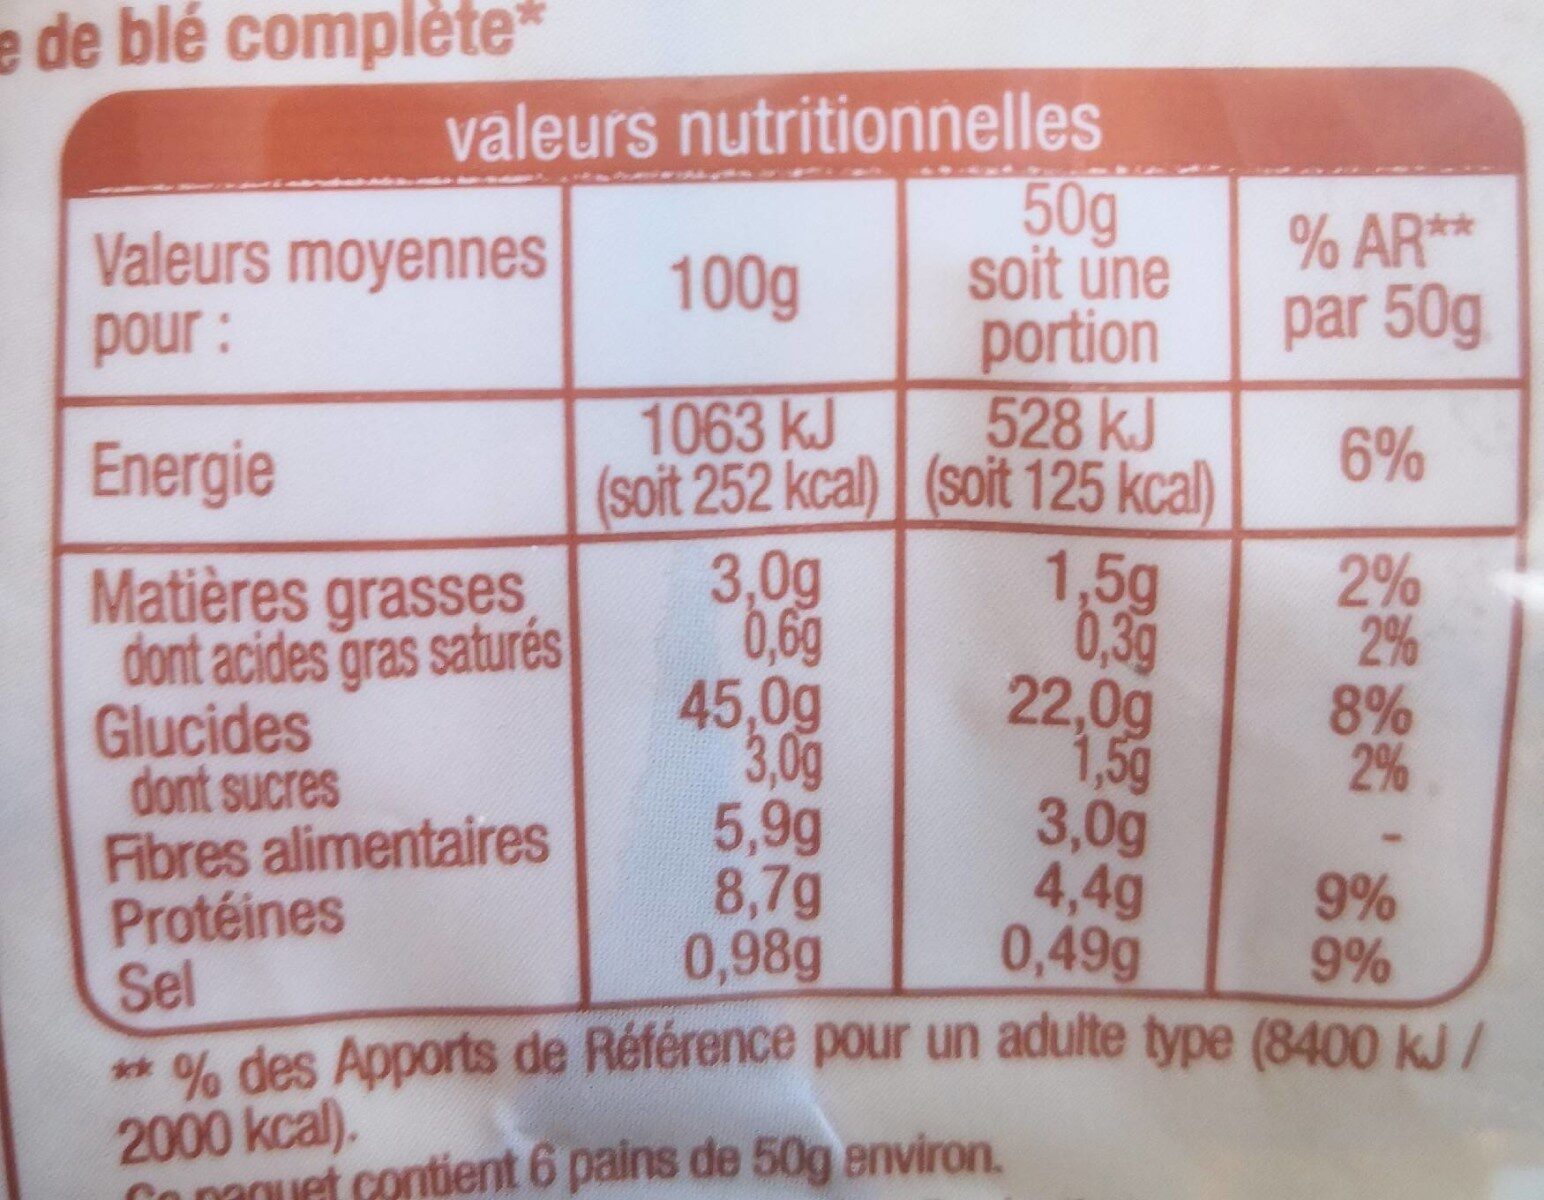 6 Petits Pains complets - Nutrition facts - fr